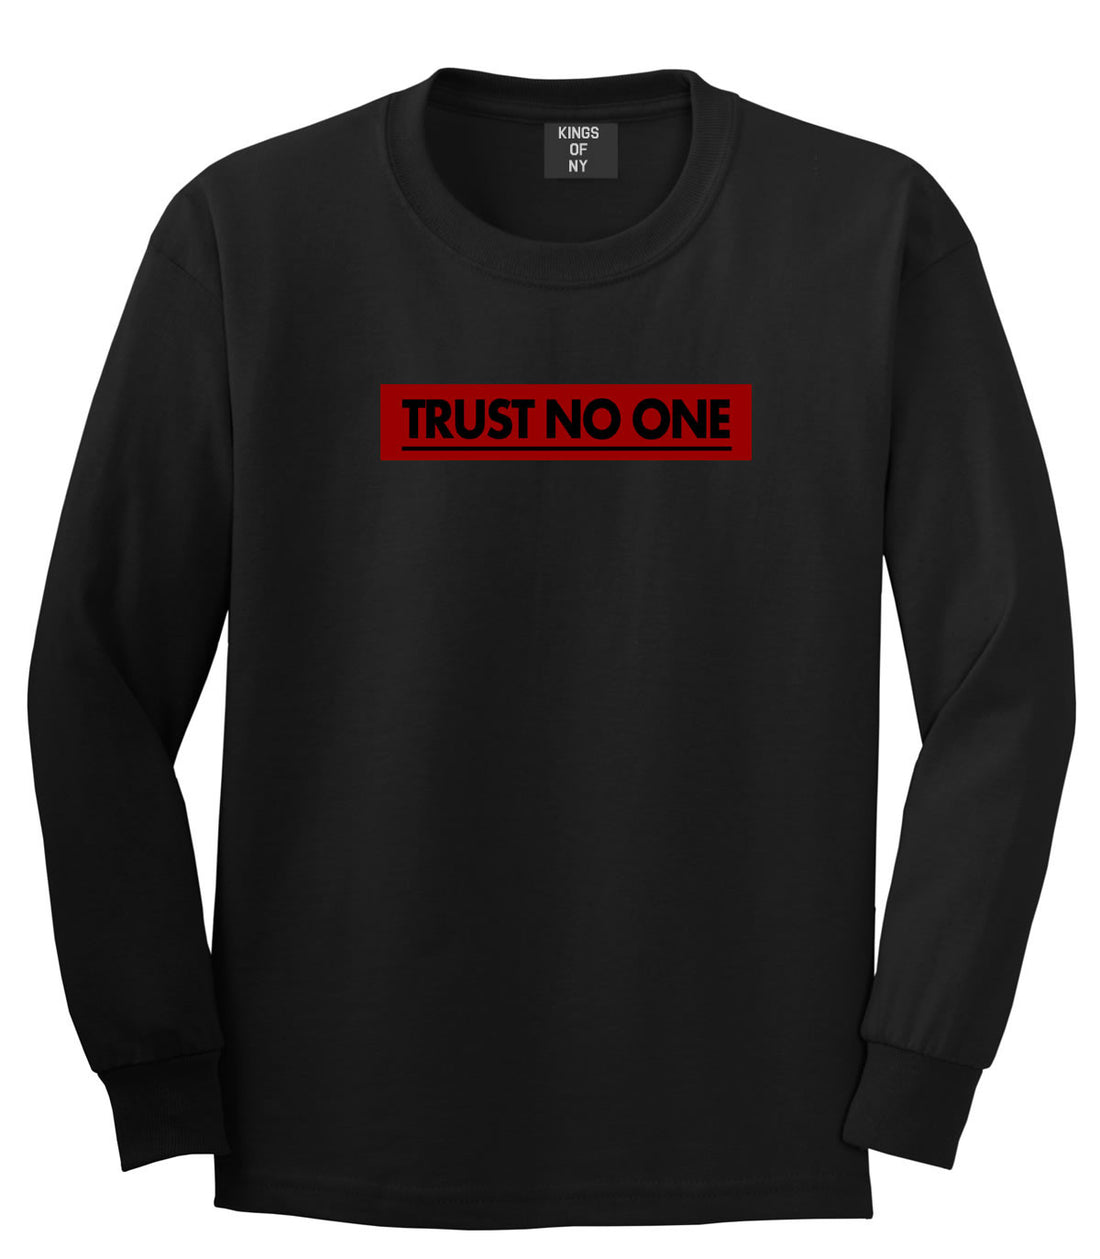 Trust No One Long Sleeve T-Shirt in Black By Kings Of NY